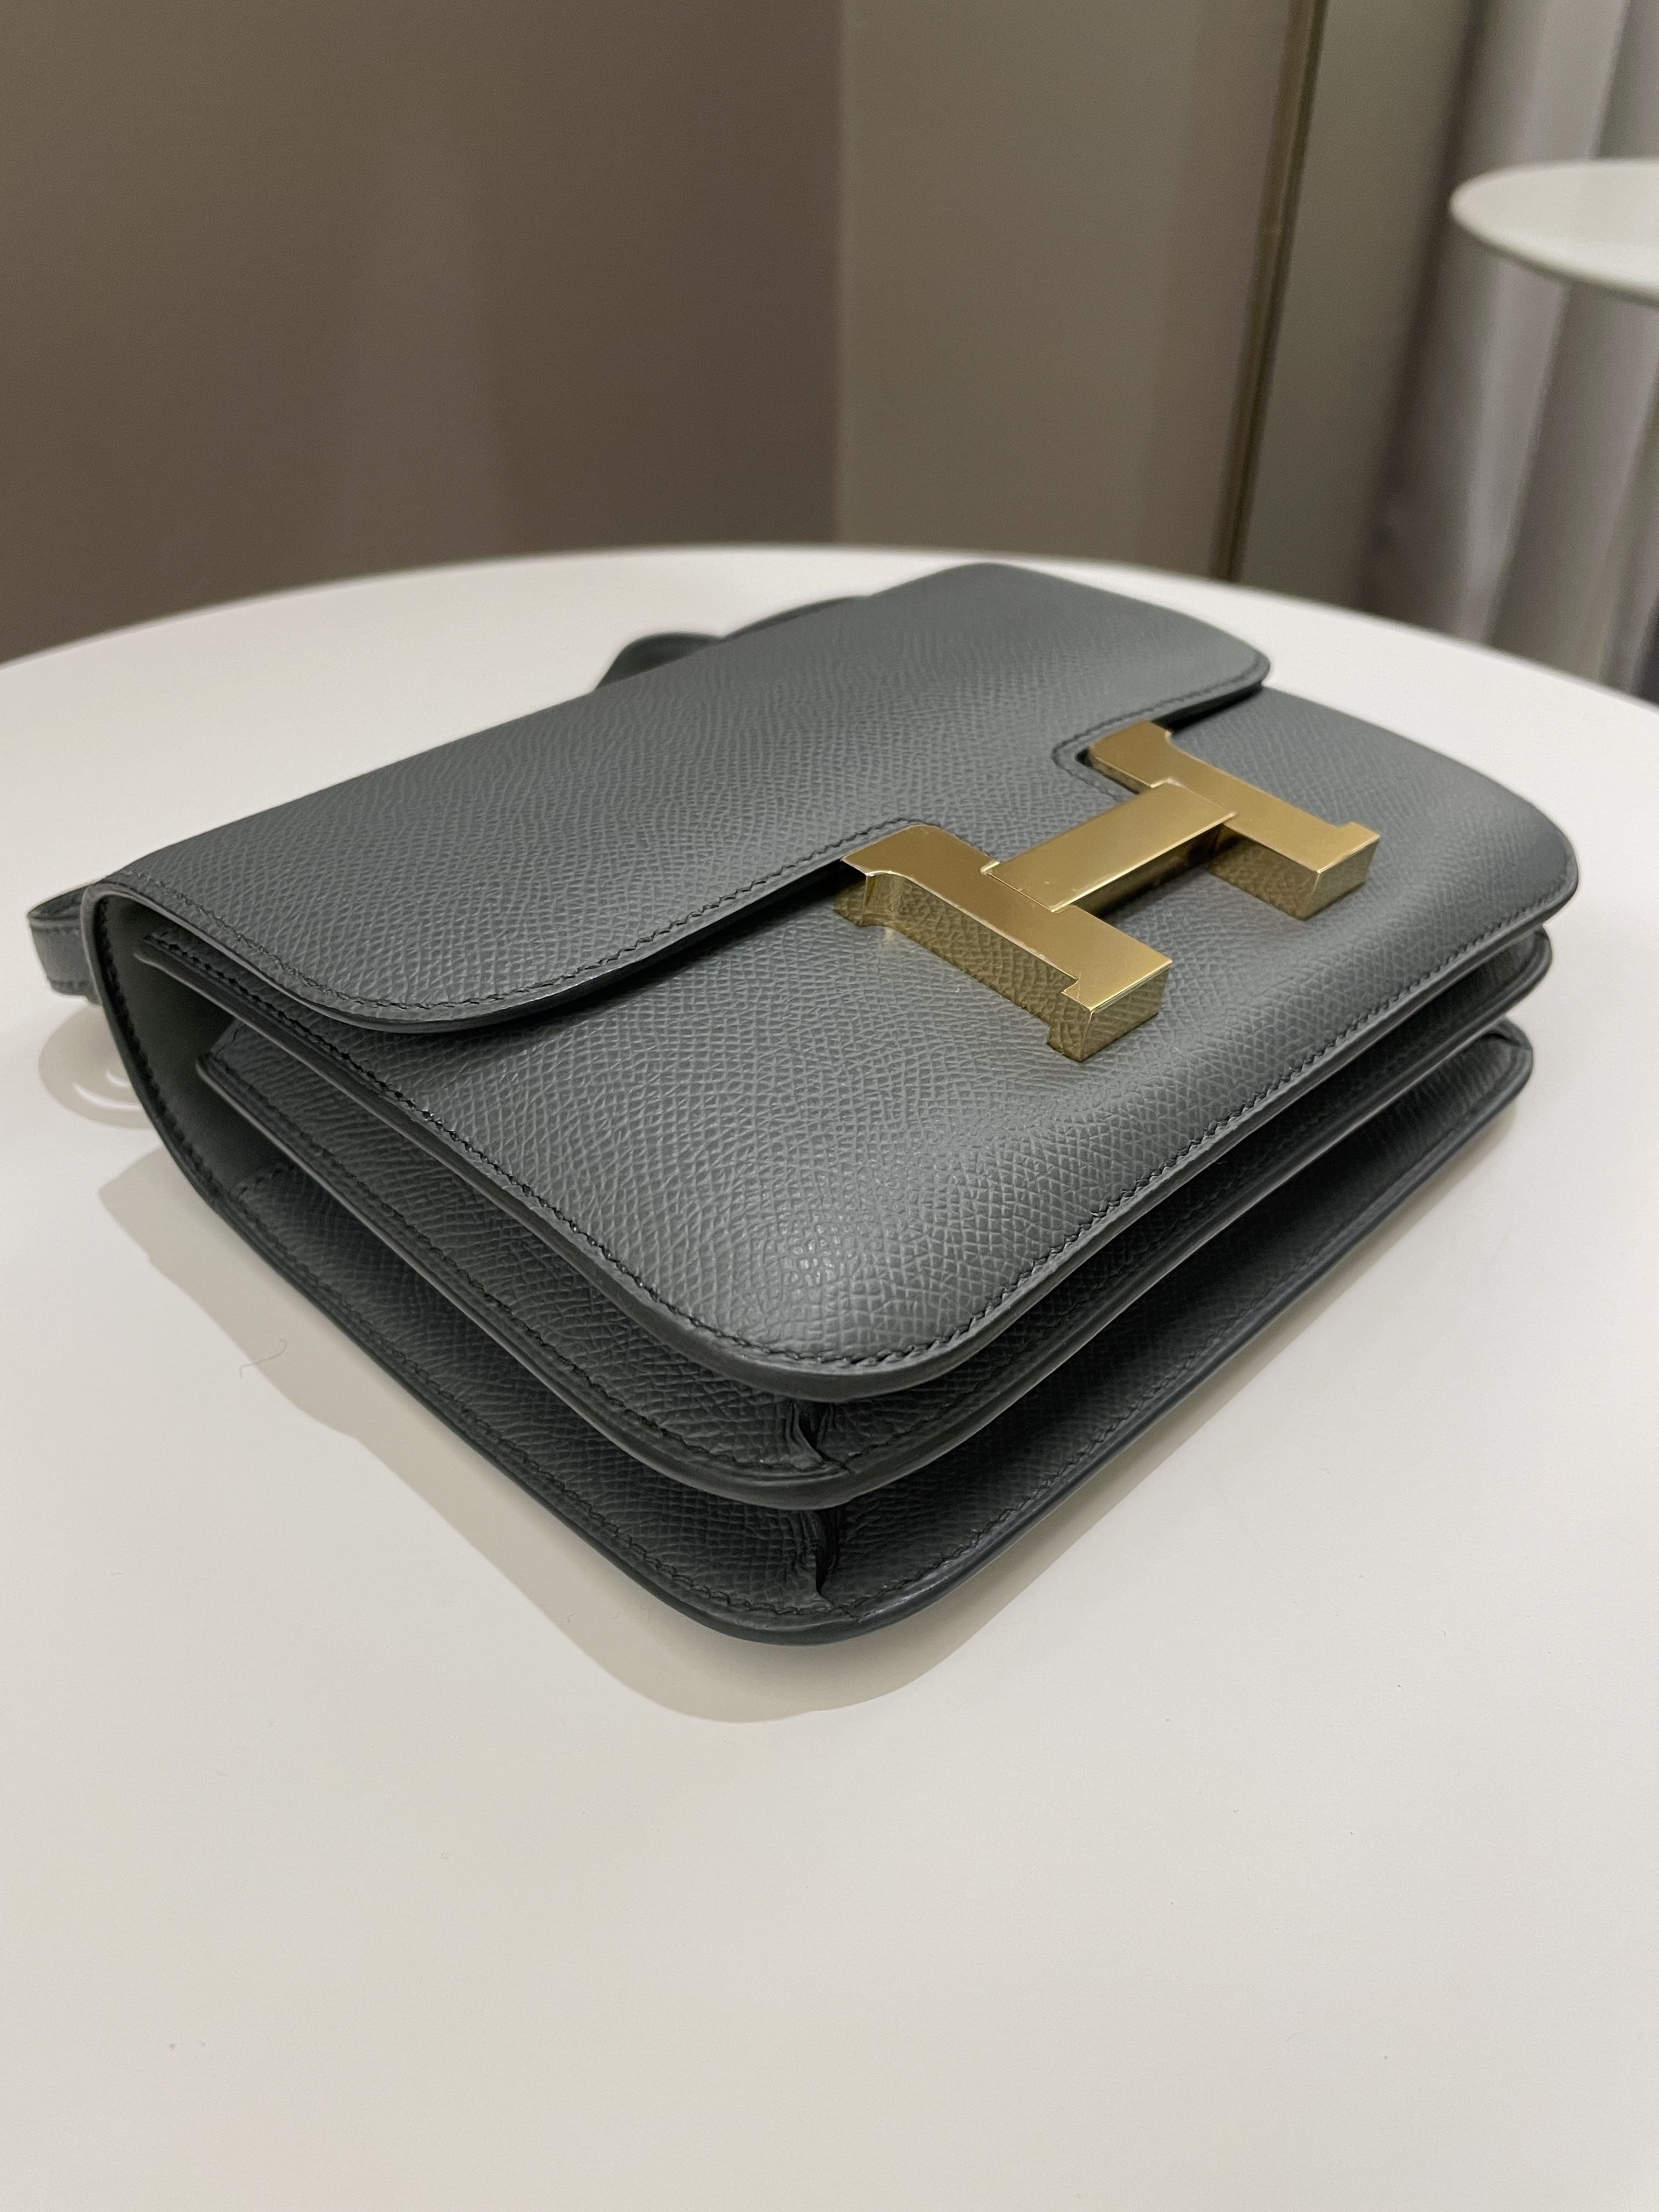 Hermès Vert Amande Constance 18cm of Epsom Leather with Gold